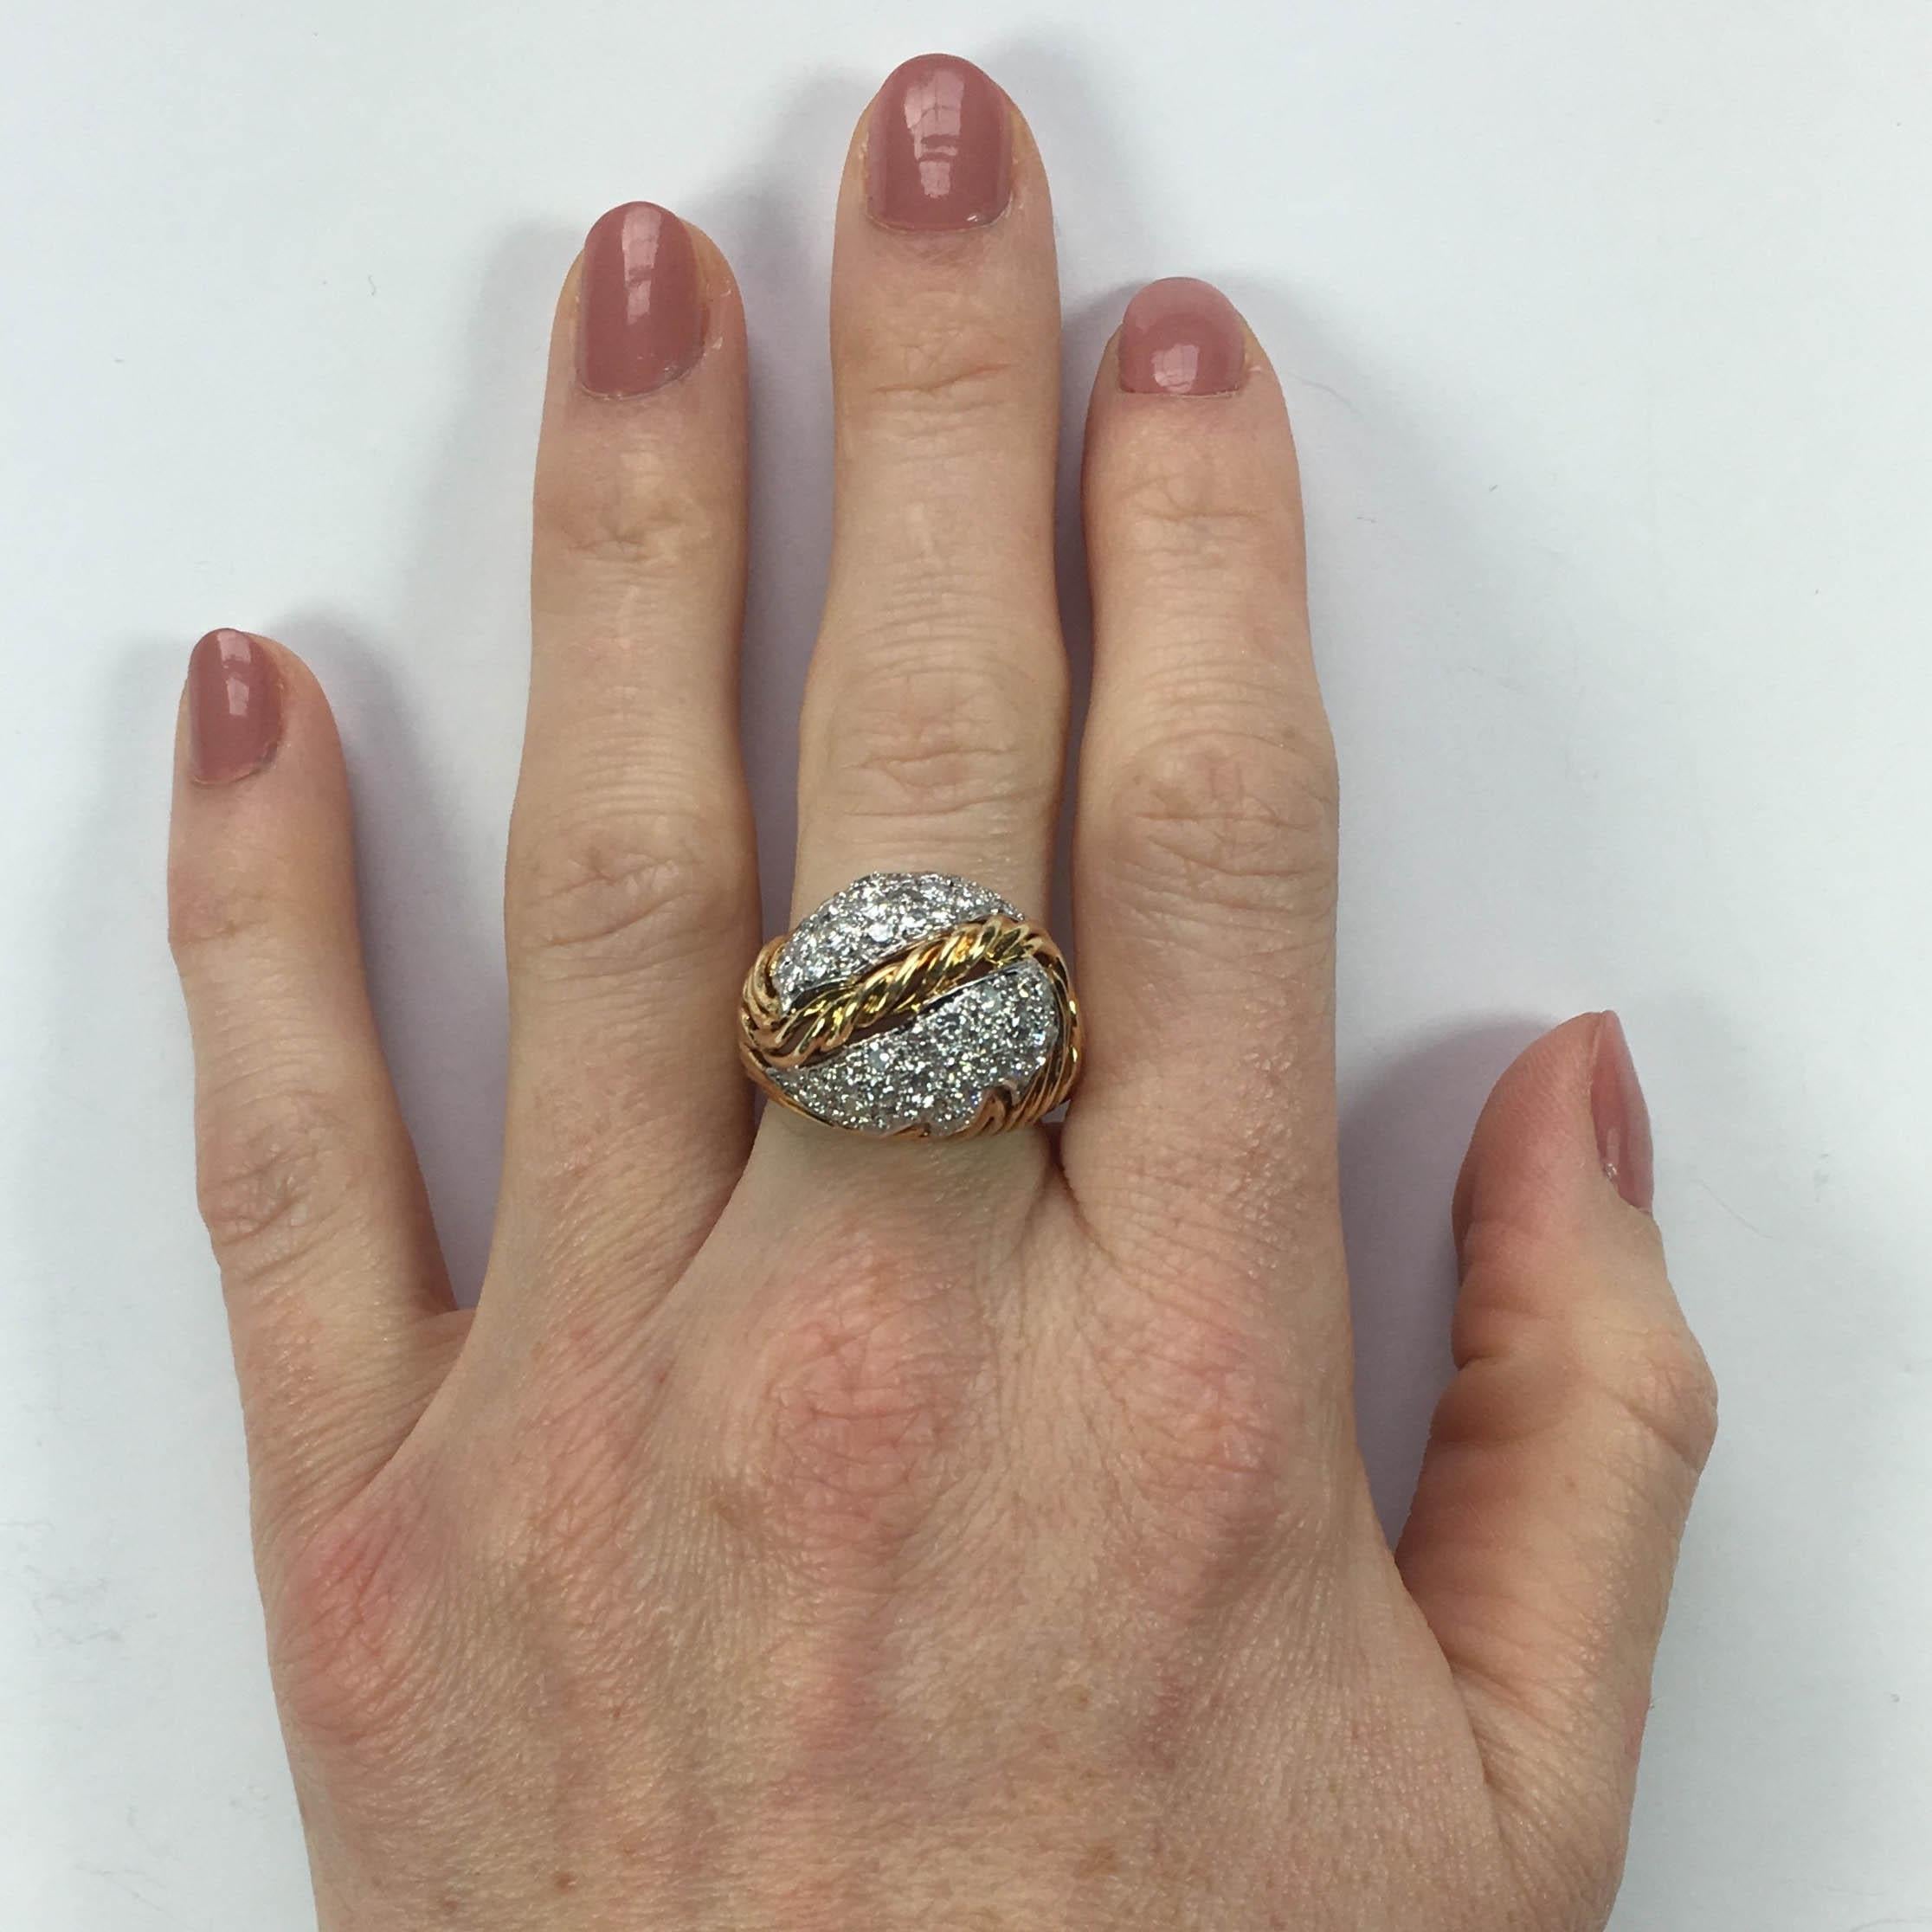 A fabulous dome ring designed as wirework strands of golden grass supporting a pavé set diamond leaf with a twisted gold central vein.   The perfect ring for autumn/fall!

The ring is set with 48 round brilliant-cut diamonds with a total approximate